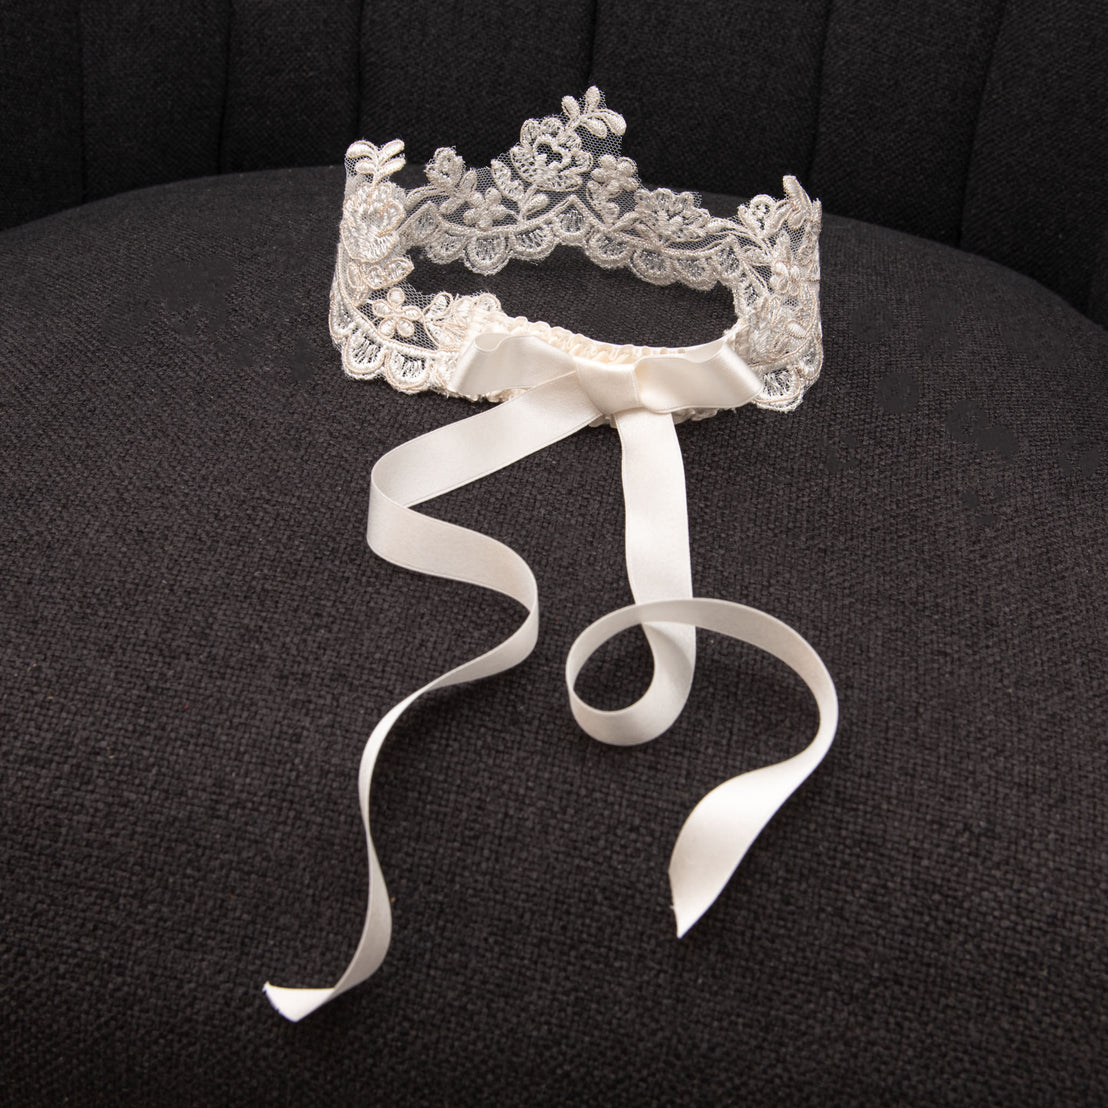 Product photo of lace crown on chair.